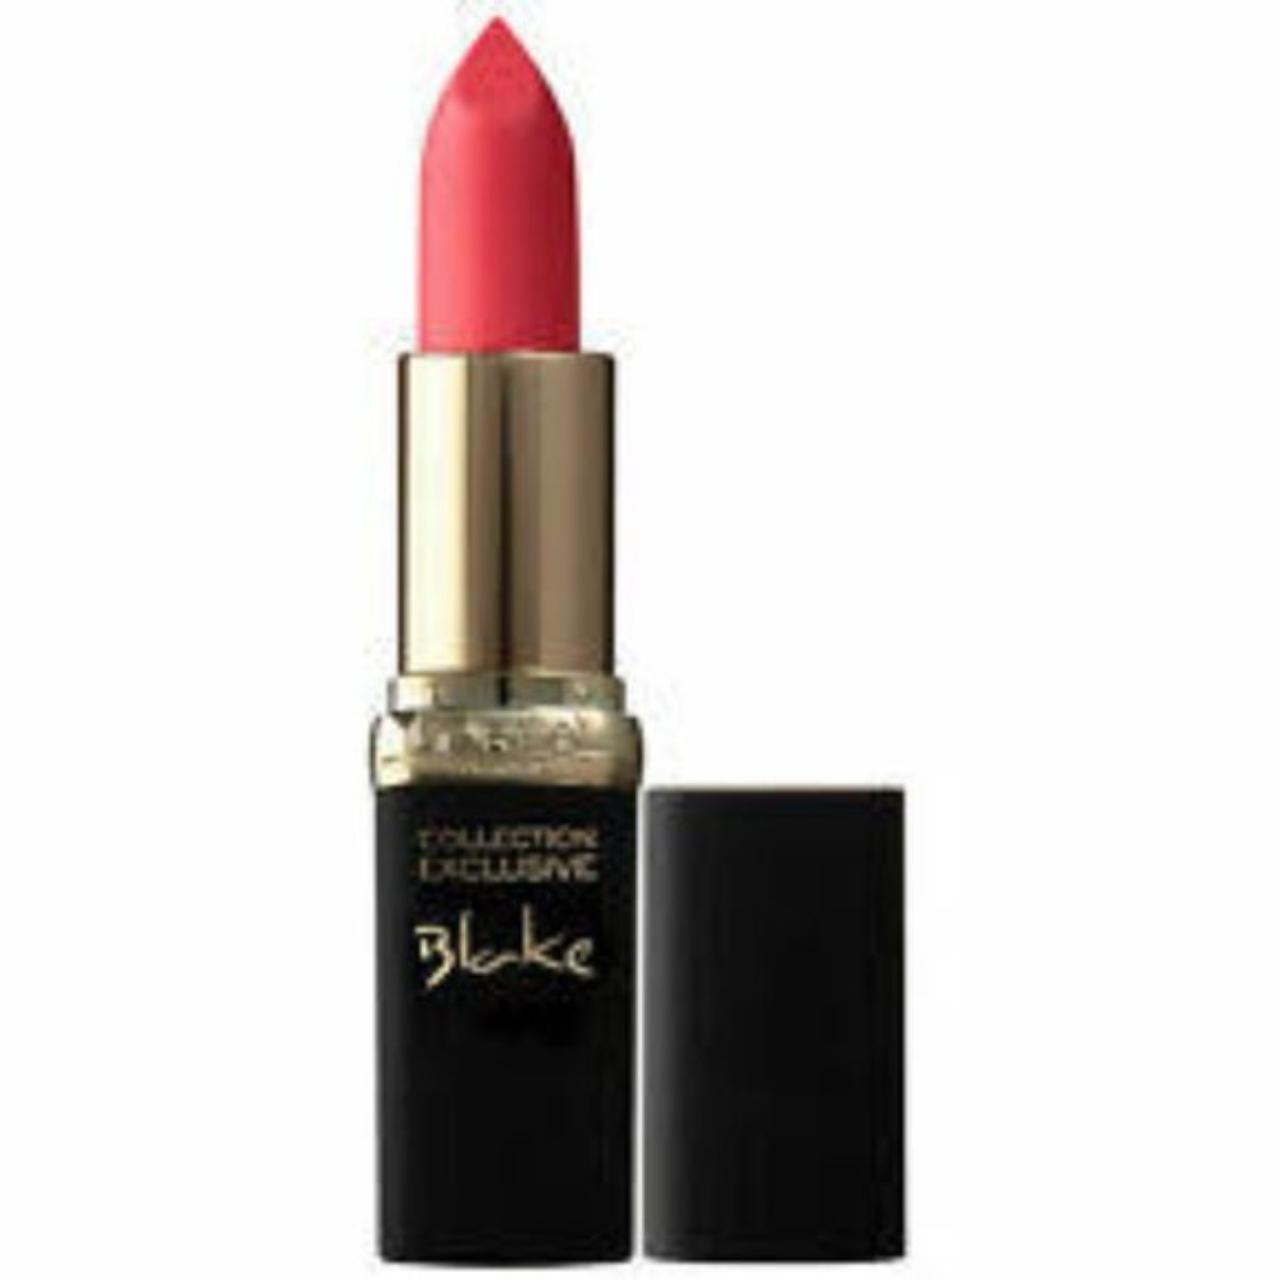 Product Image 1 - L'oreal Paris Collection Exclusive Blake